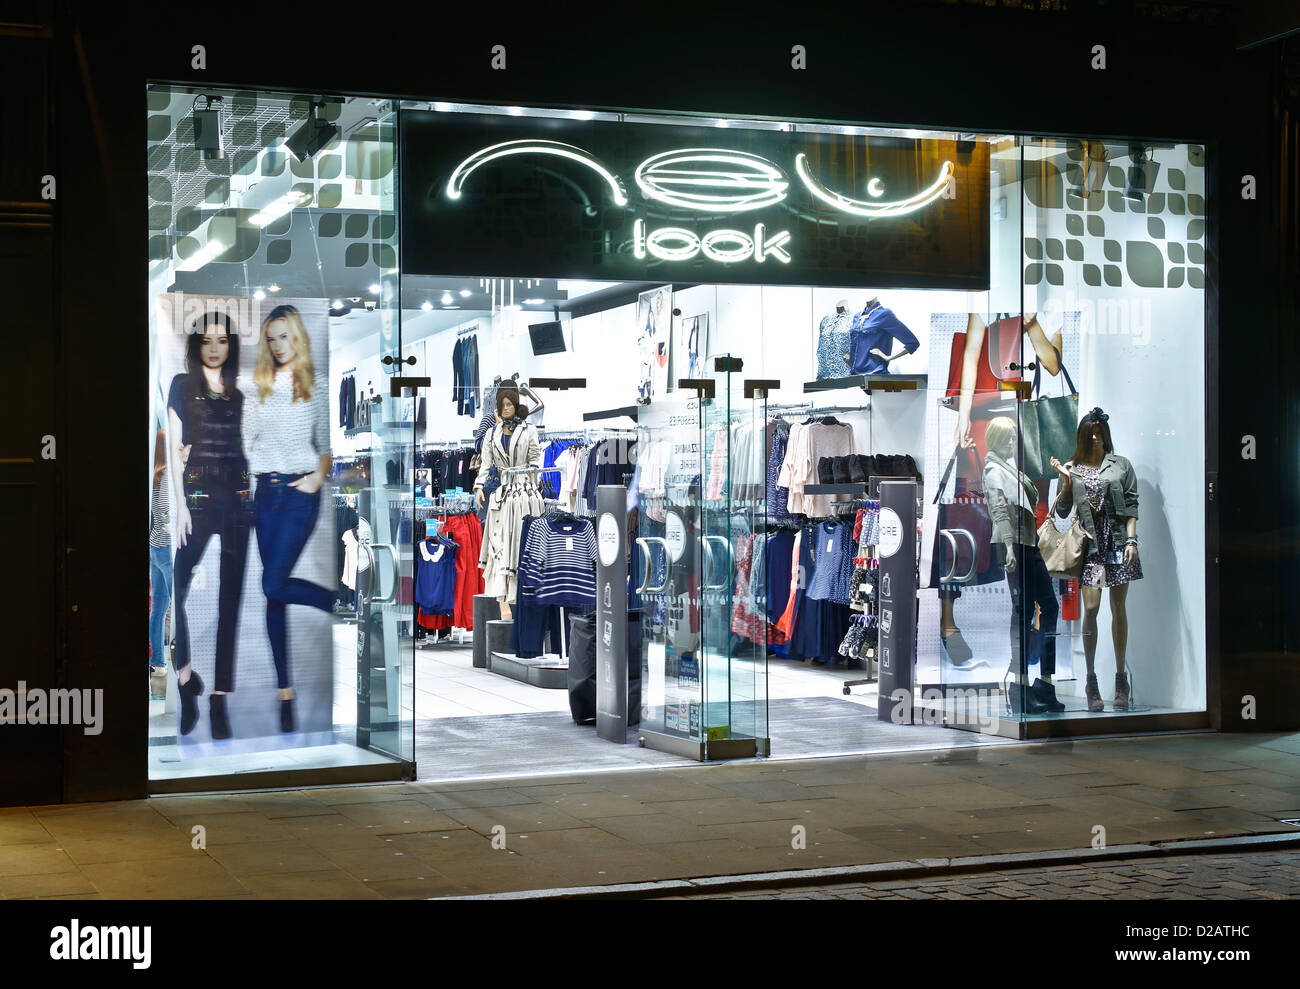 New Look fashion retailer shop front Stock Photo